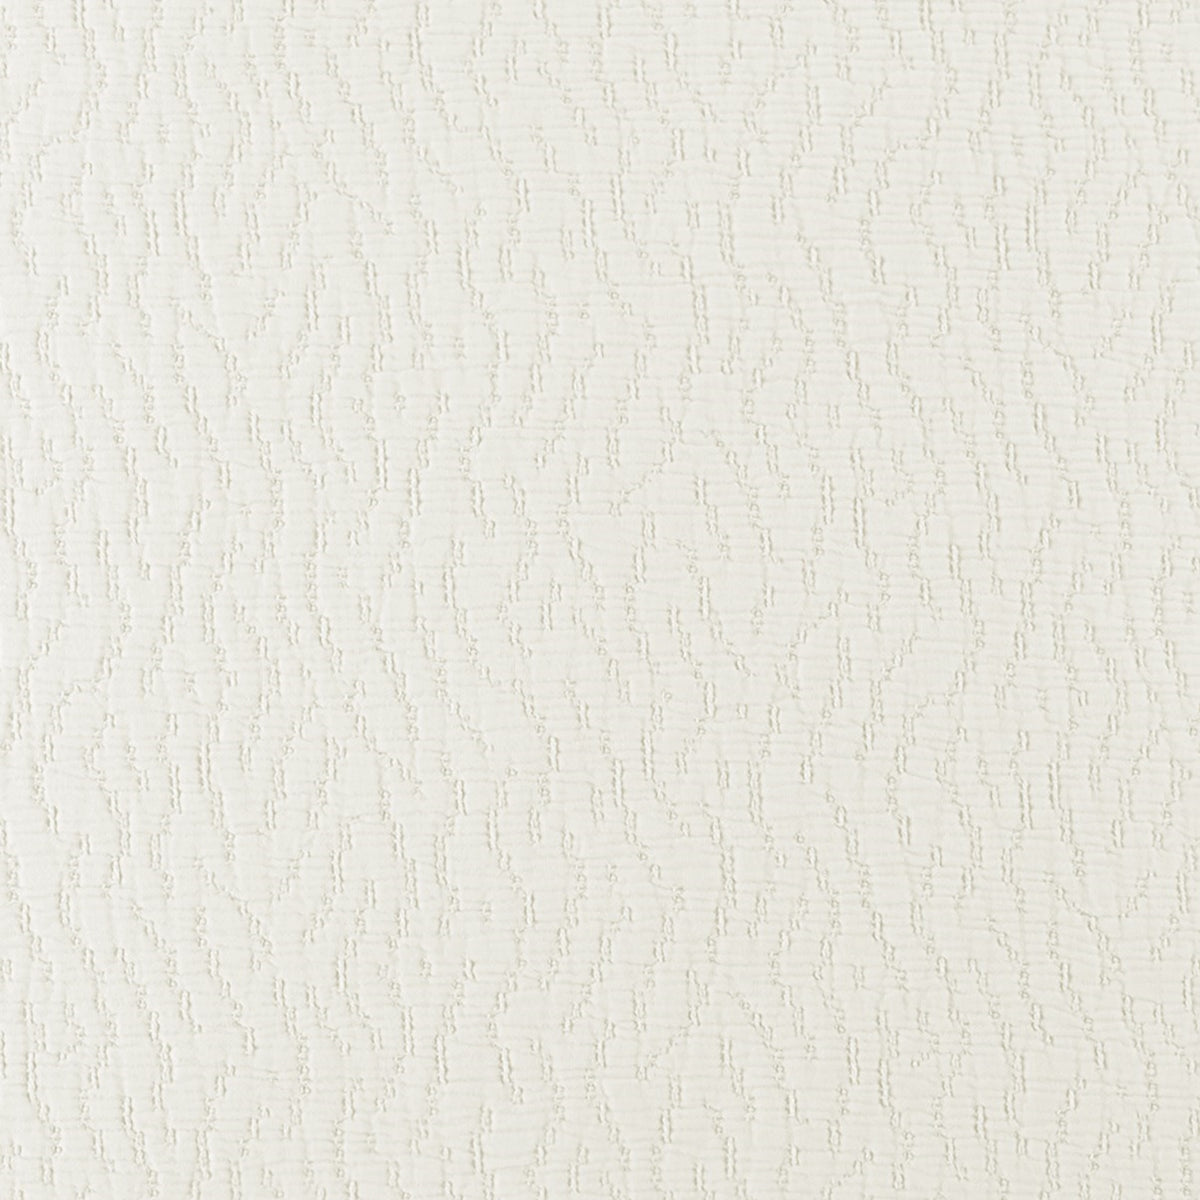 Swatch Sample of Peacock Alley Mia Stonewashed Matelassé Bedding in Color Pearl